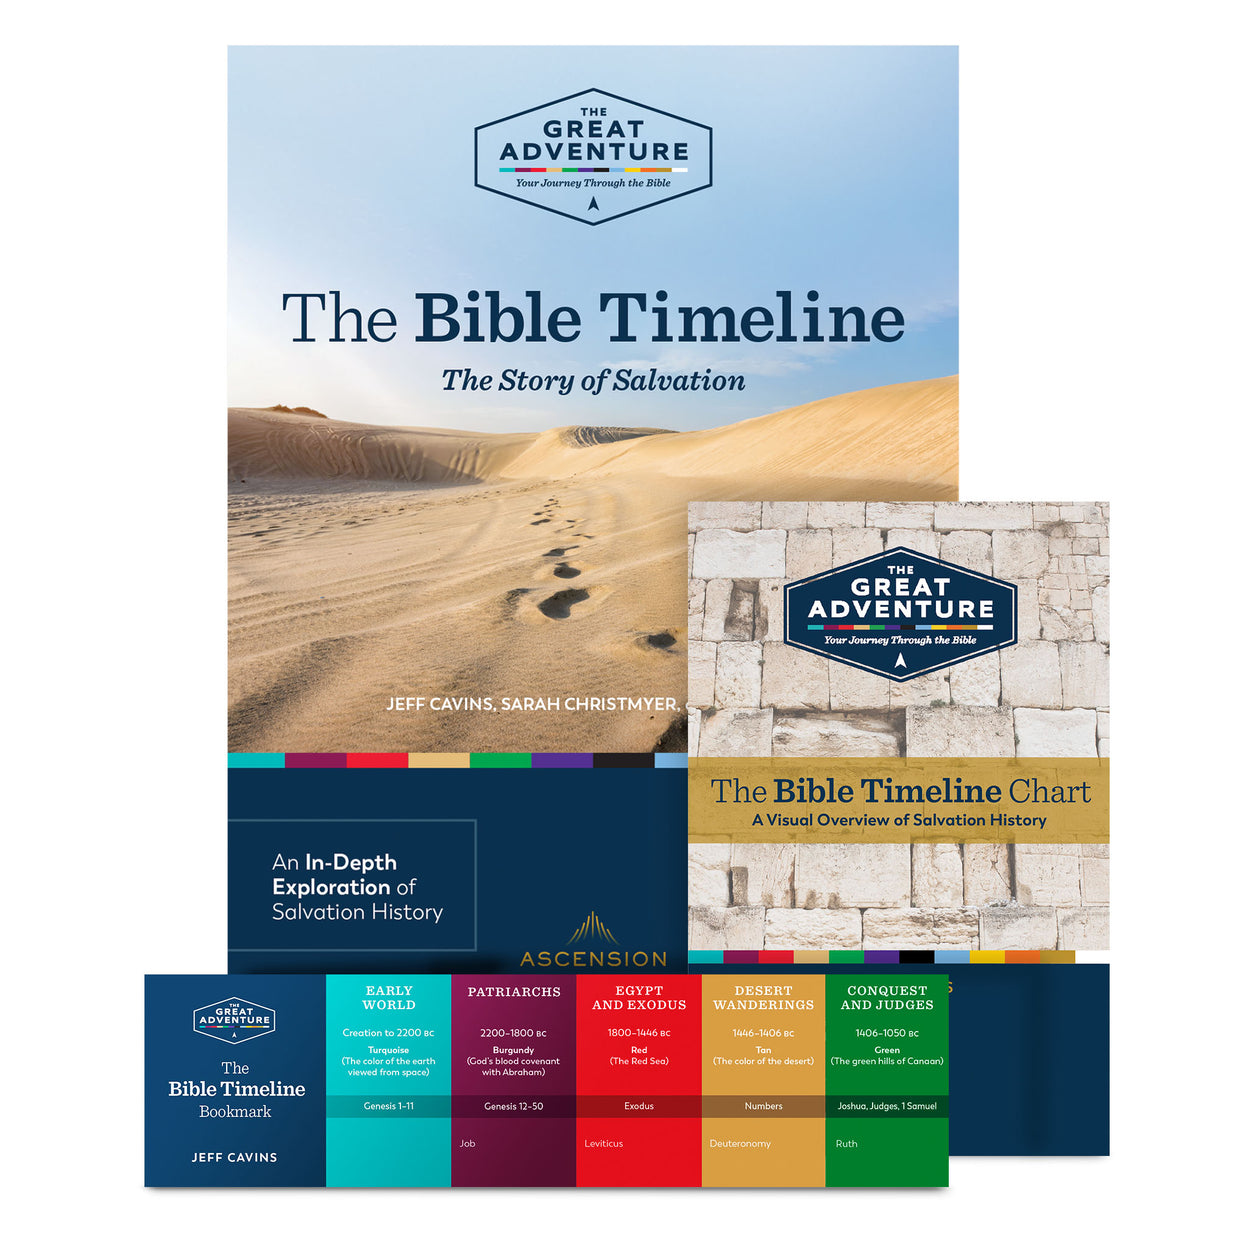 The Great Adventure Bible Timeline Chart